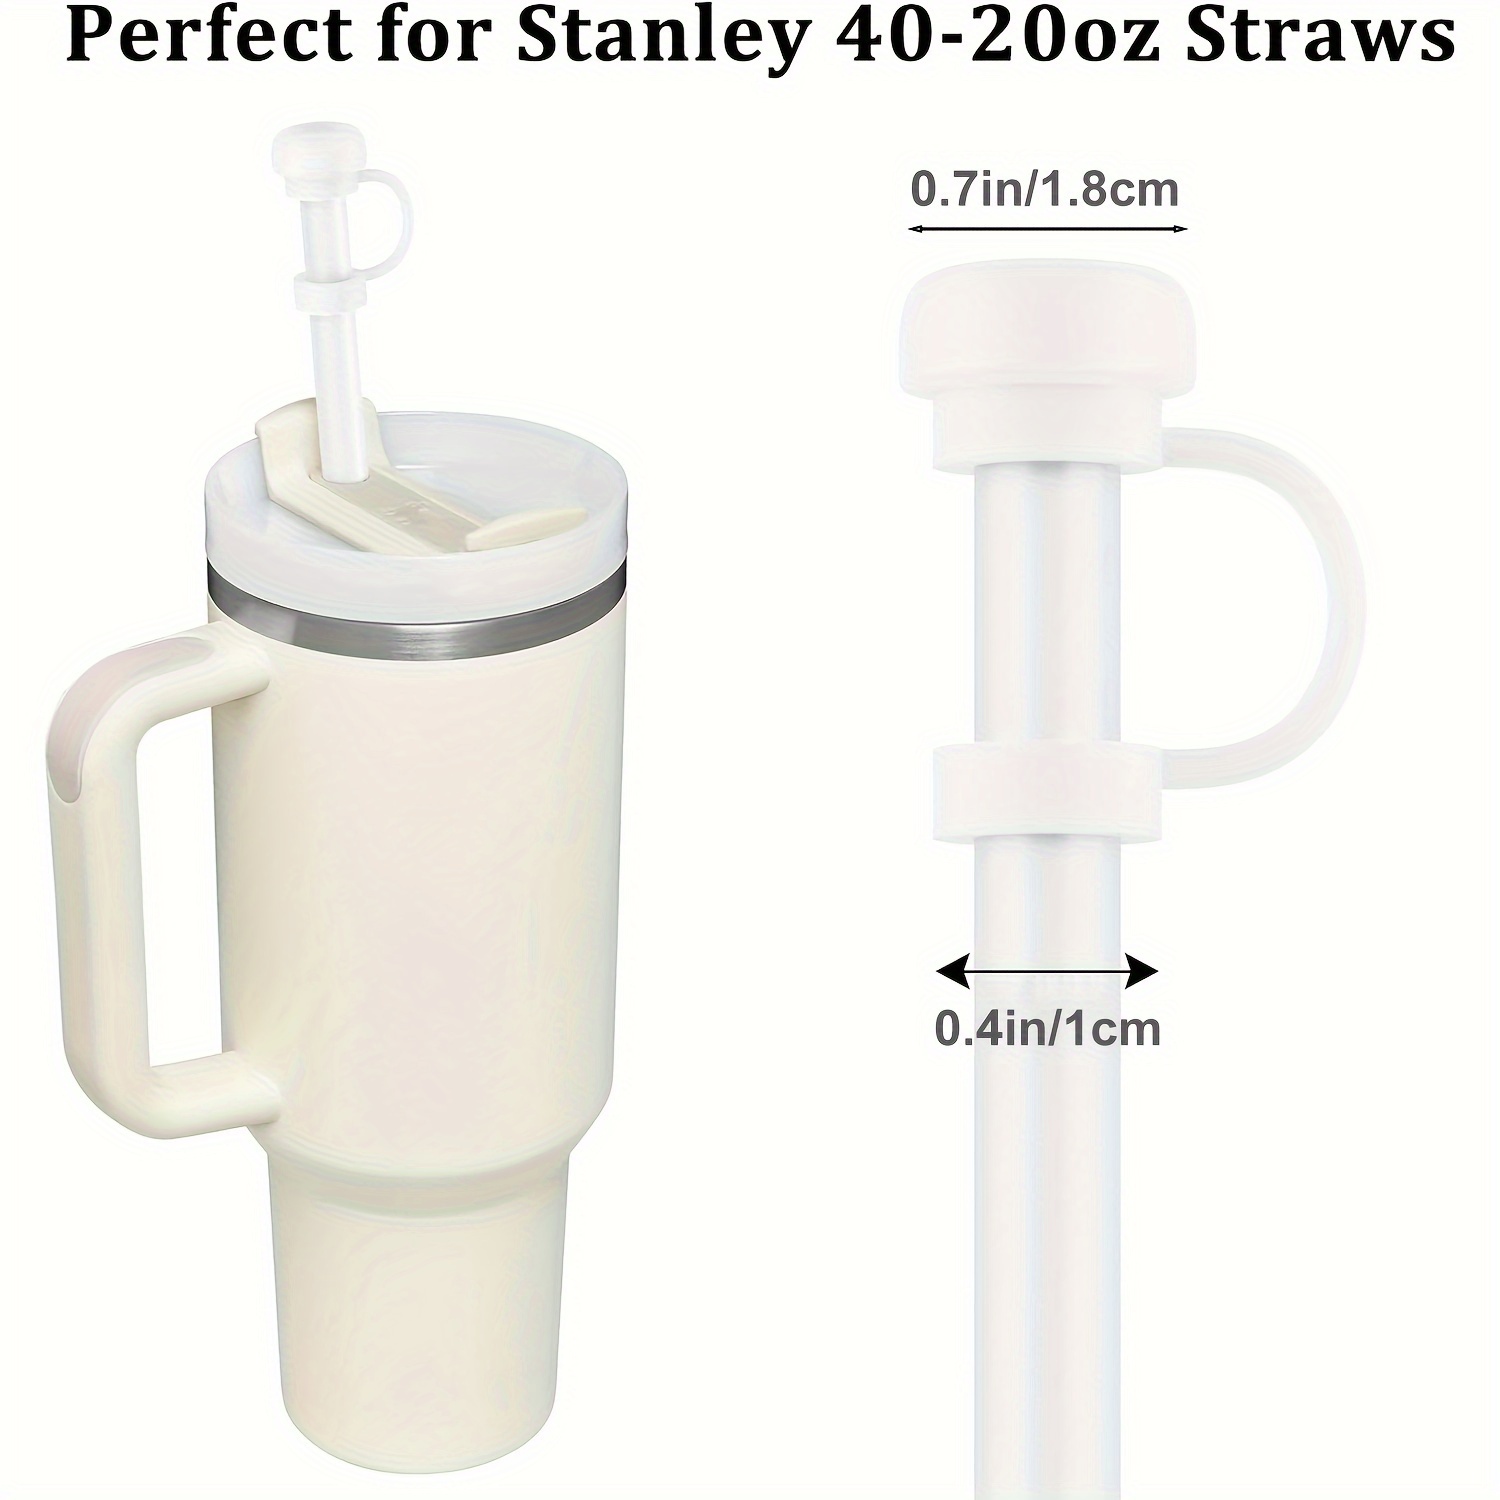  Straw Cap Cover for Stanley Cup Accessories- 0.4 Inch